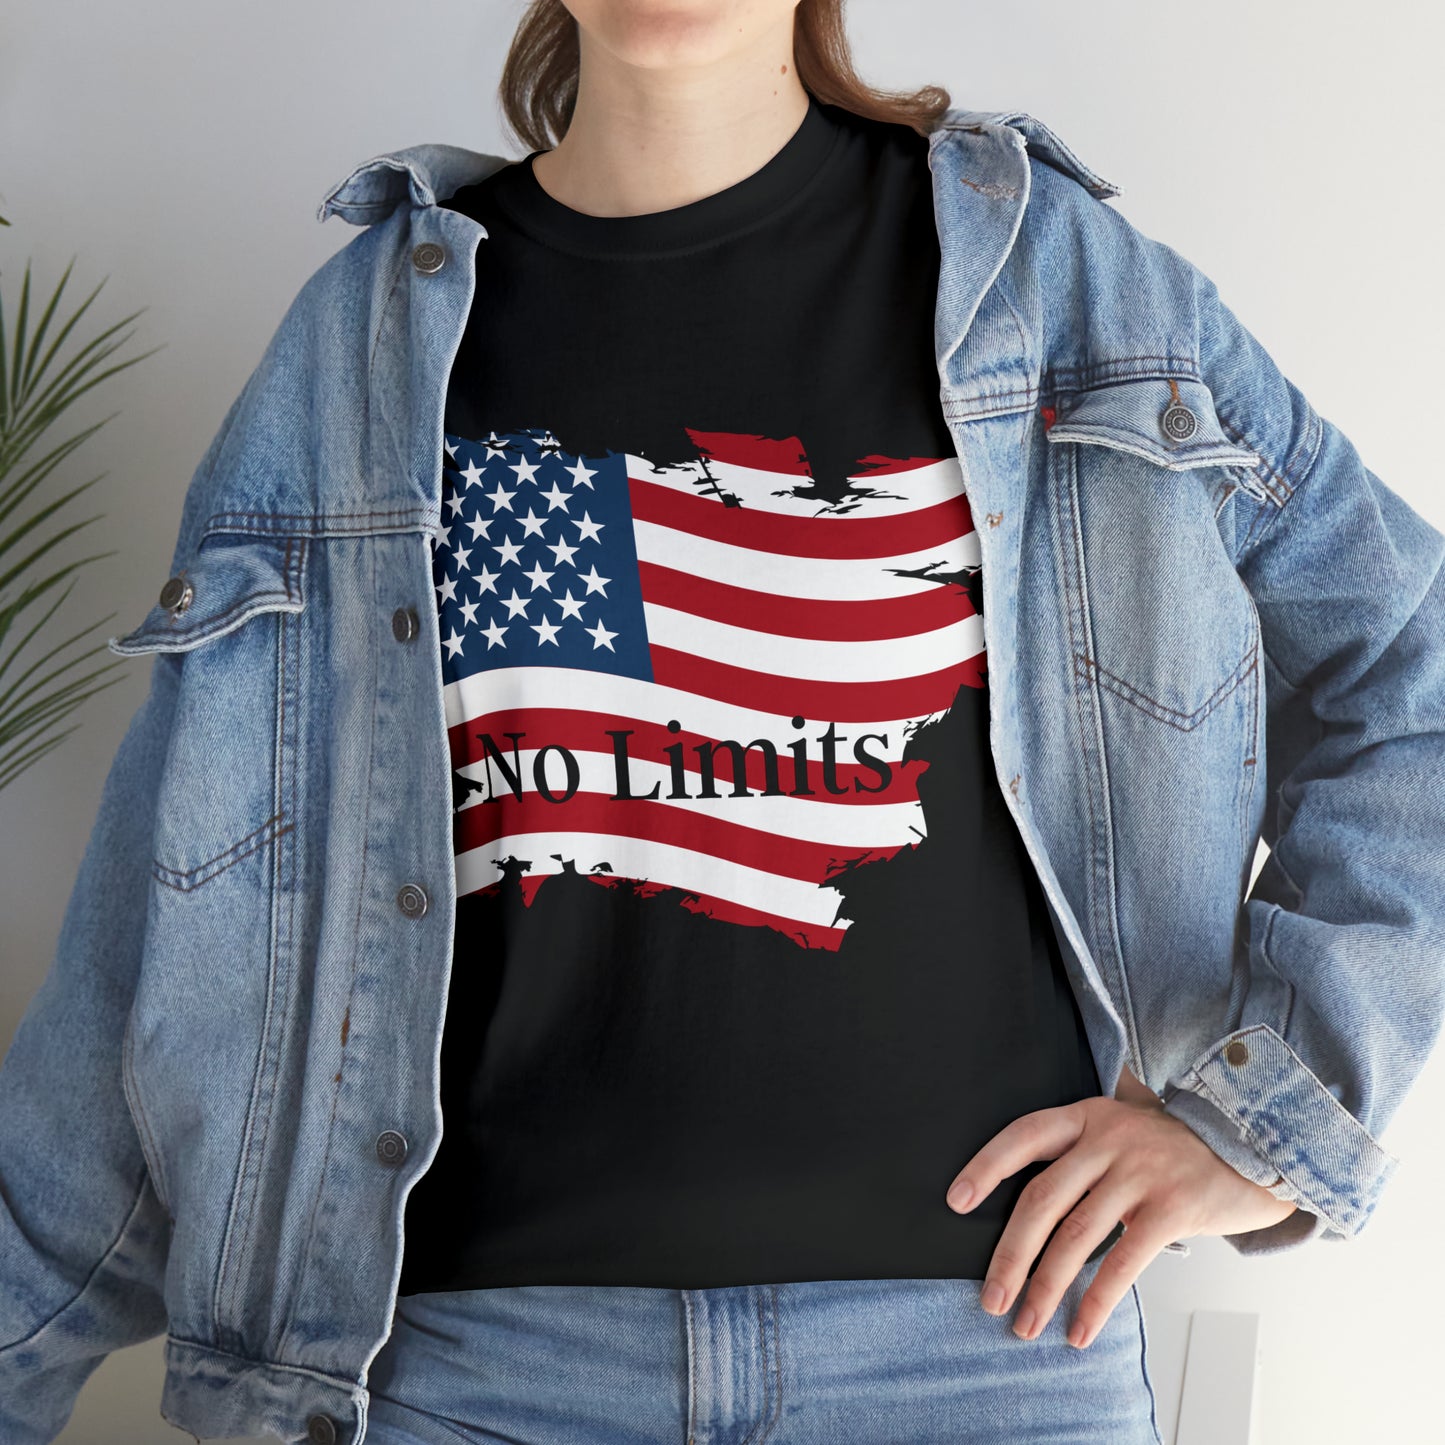 Unisex T-shirt,Unique style with USA flag,Perfect gift